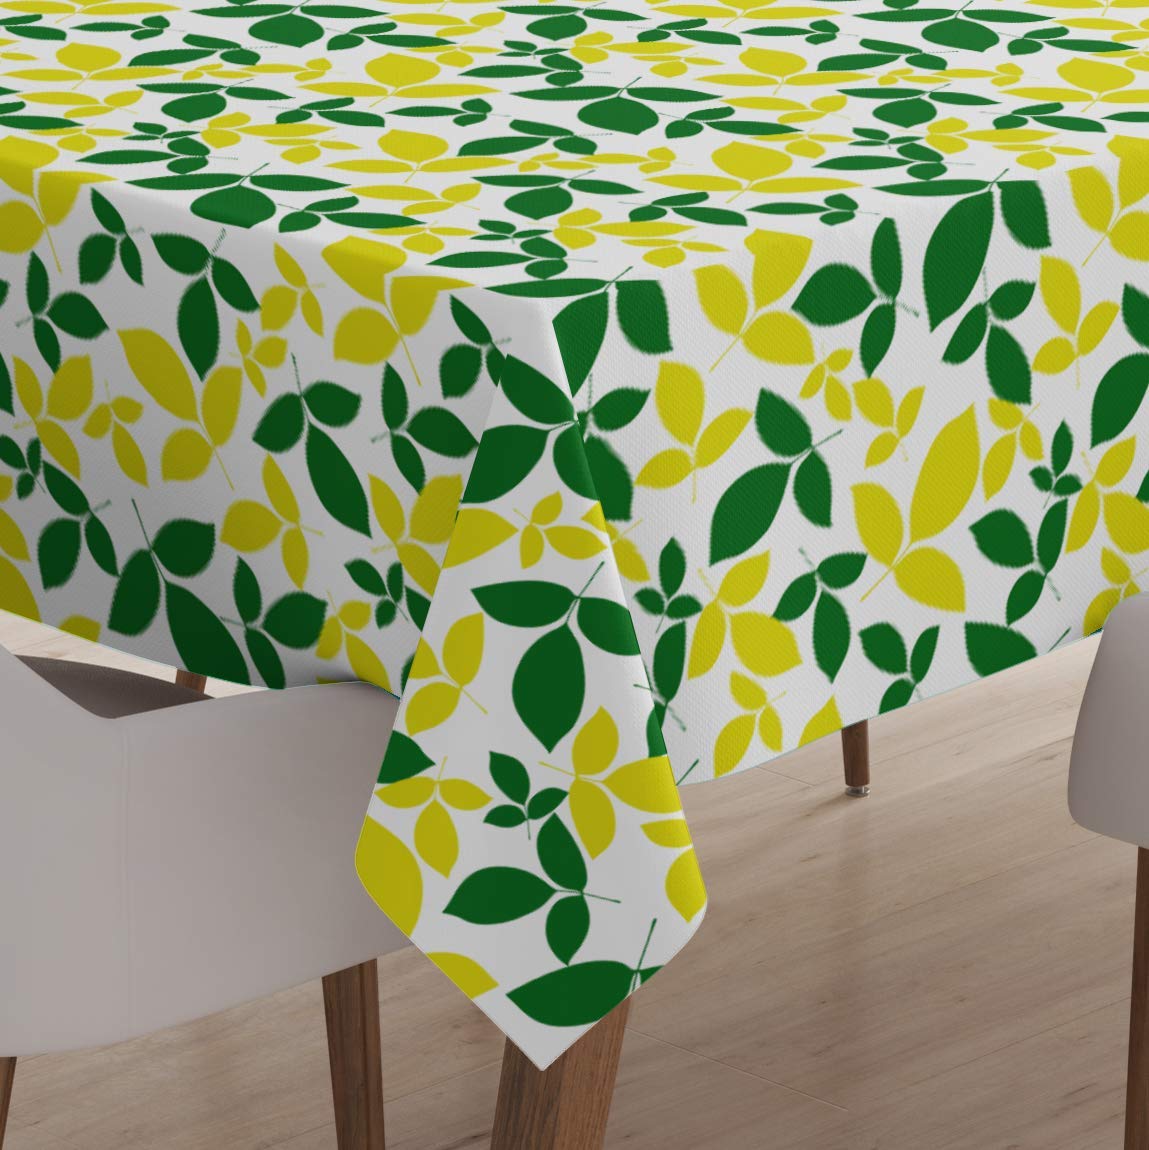 Encasa Homes Printed Table Cloth 7.5 ft for 6 to 8 Seater Dining Table, 100% Silky Polyester, Machine Wash to Remove Food Stains, Non-Fading, Non-Shrinking, Cheap & Durable - Leaves